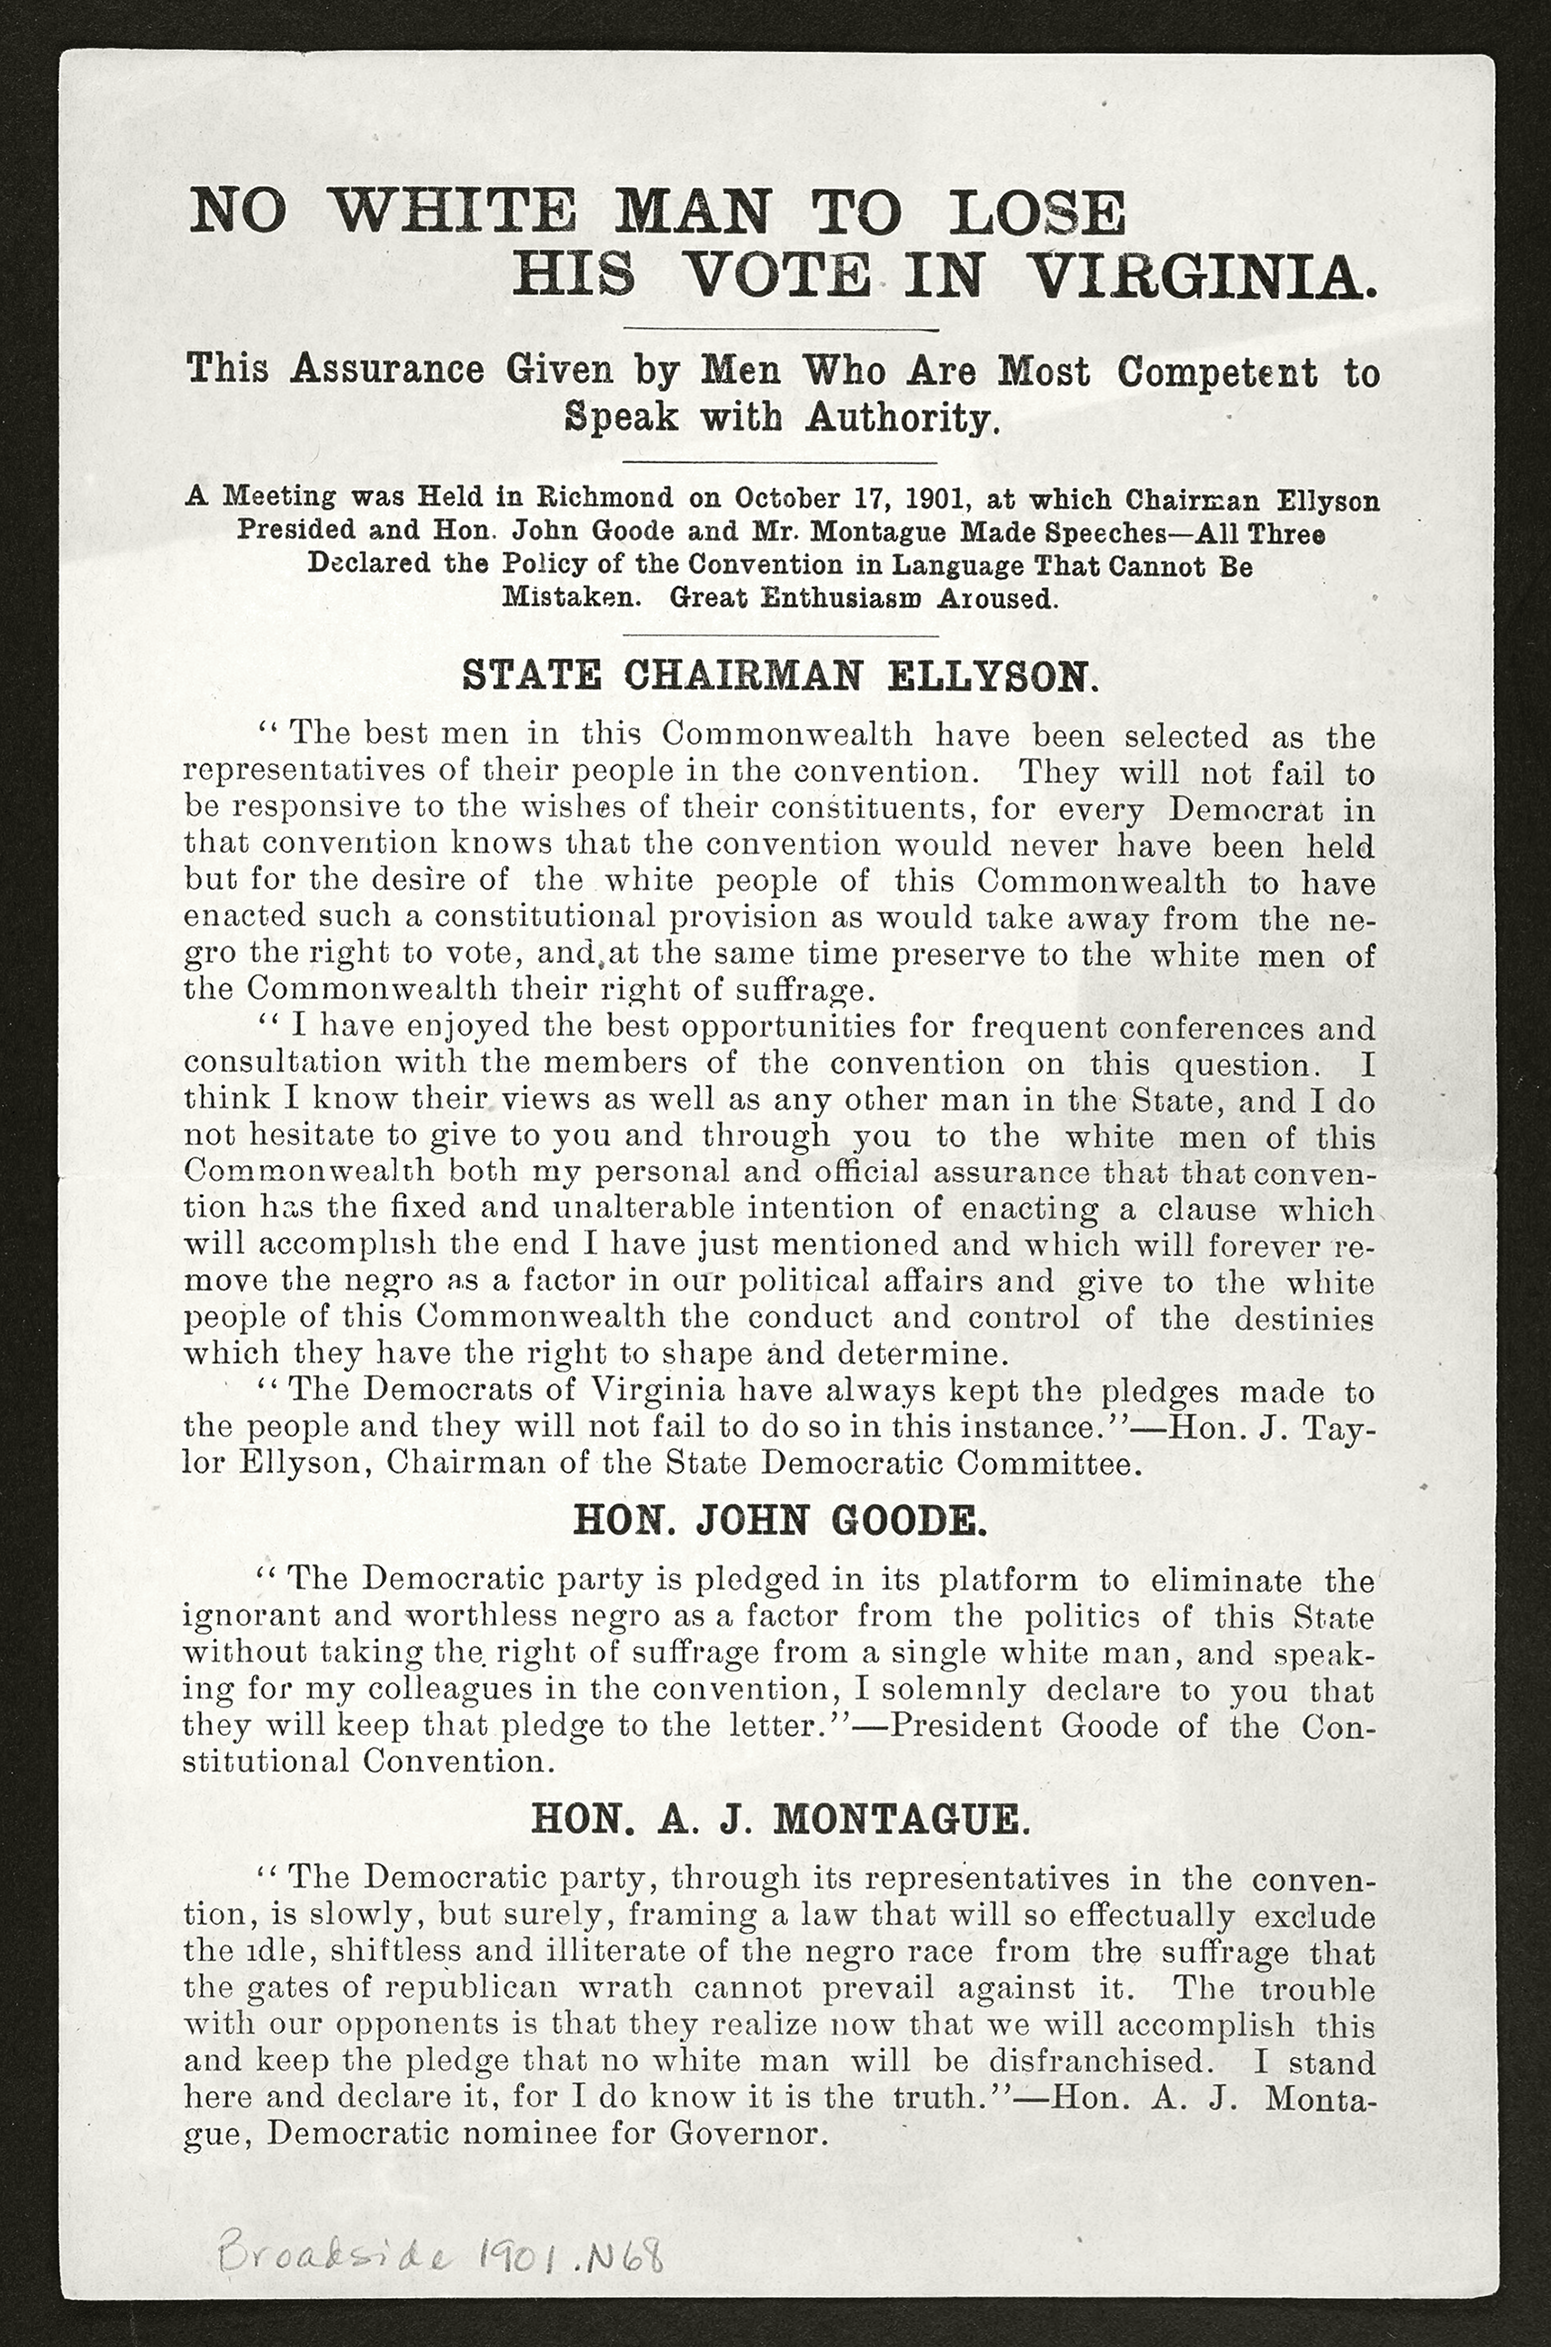 Summary of speeches on October 17, 1901 by officials offering assurances that provisions of the constitutional convention would protect the white vote. University of Virginia Library.